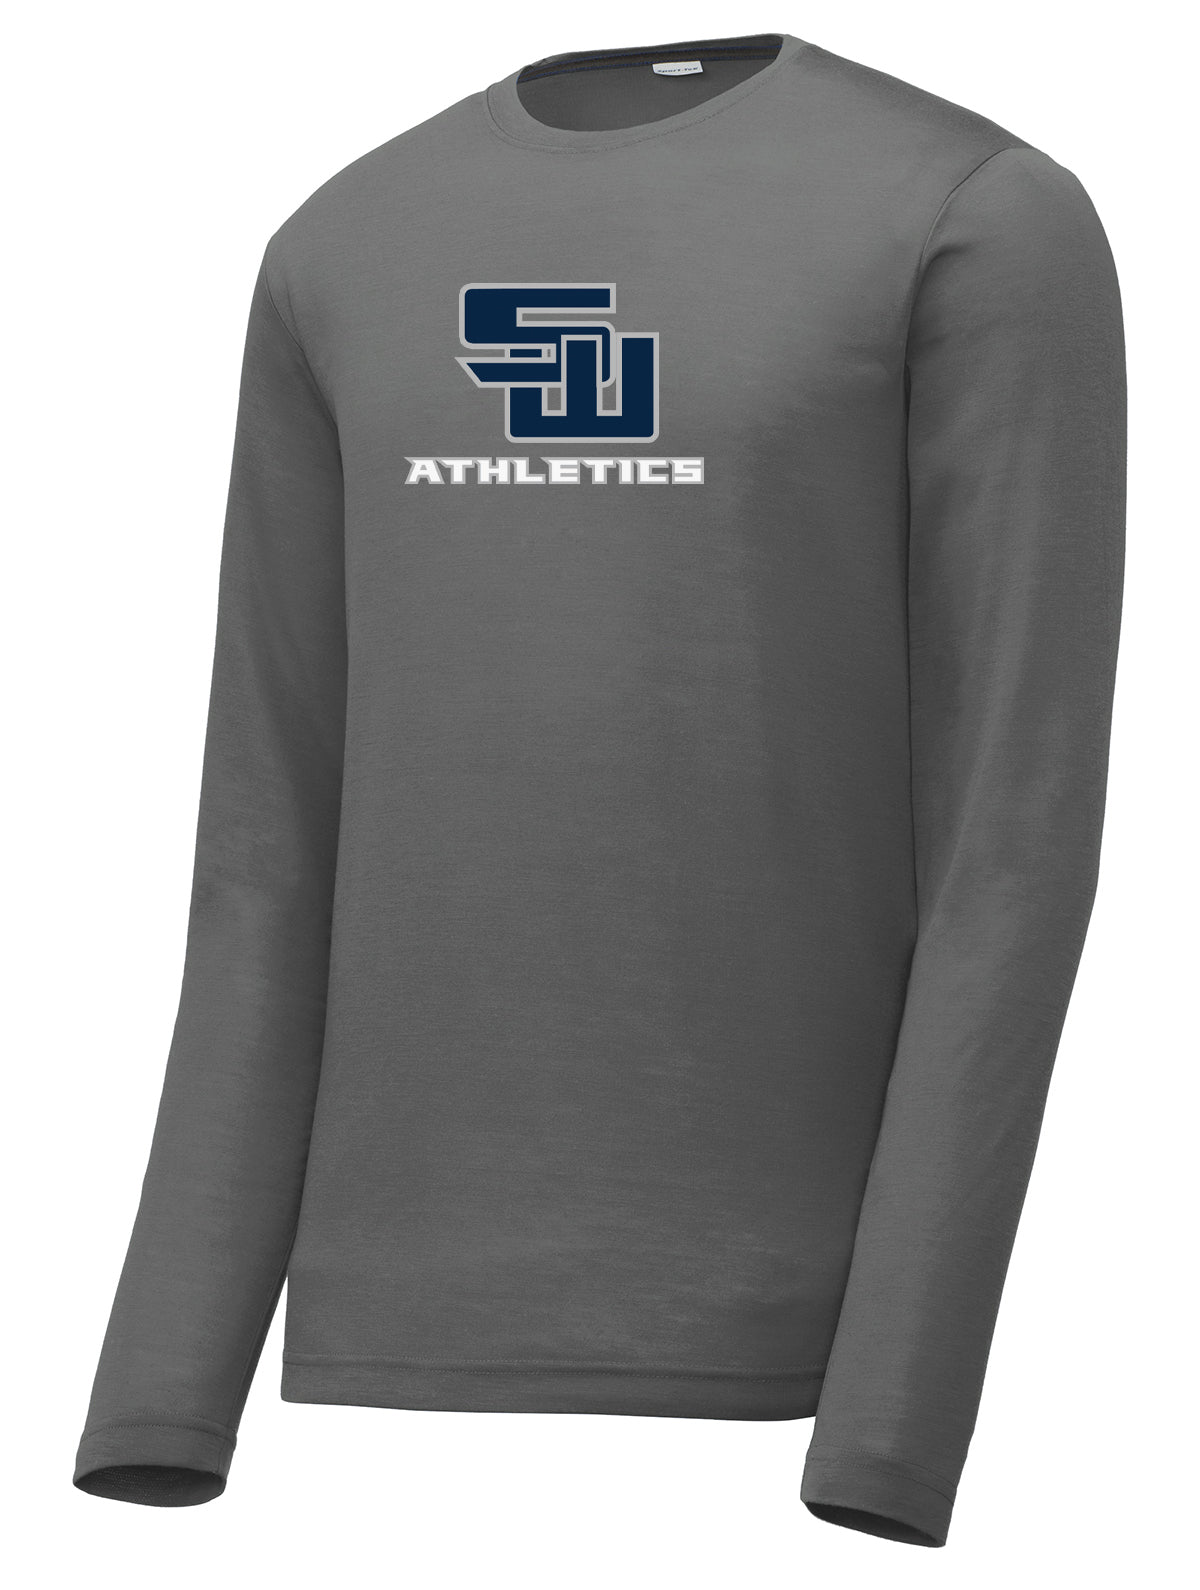 Smithtown West Athletics Long Sleeve CottonTouch Performance Shirt